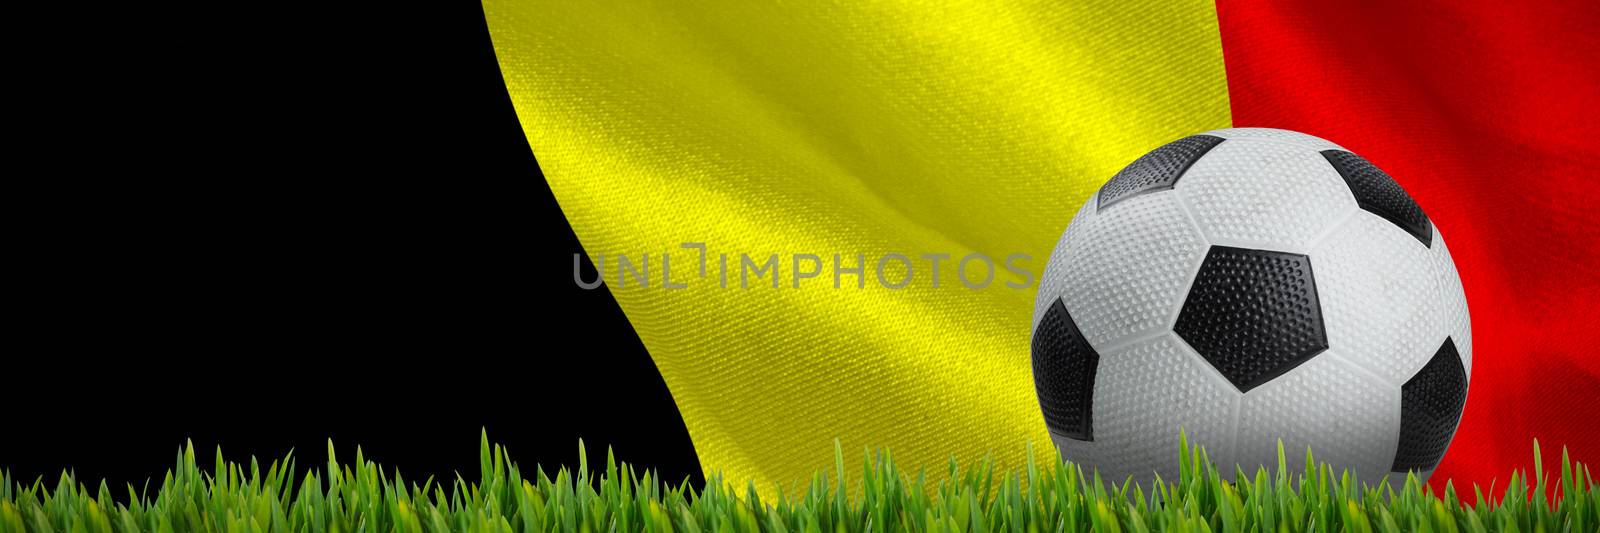 Grass growing outdoors against digitally generated belgian national flag